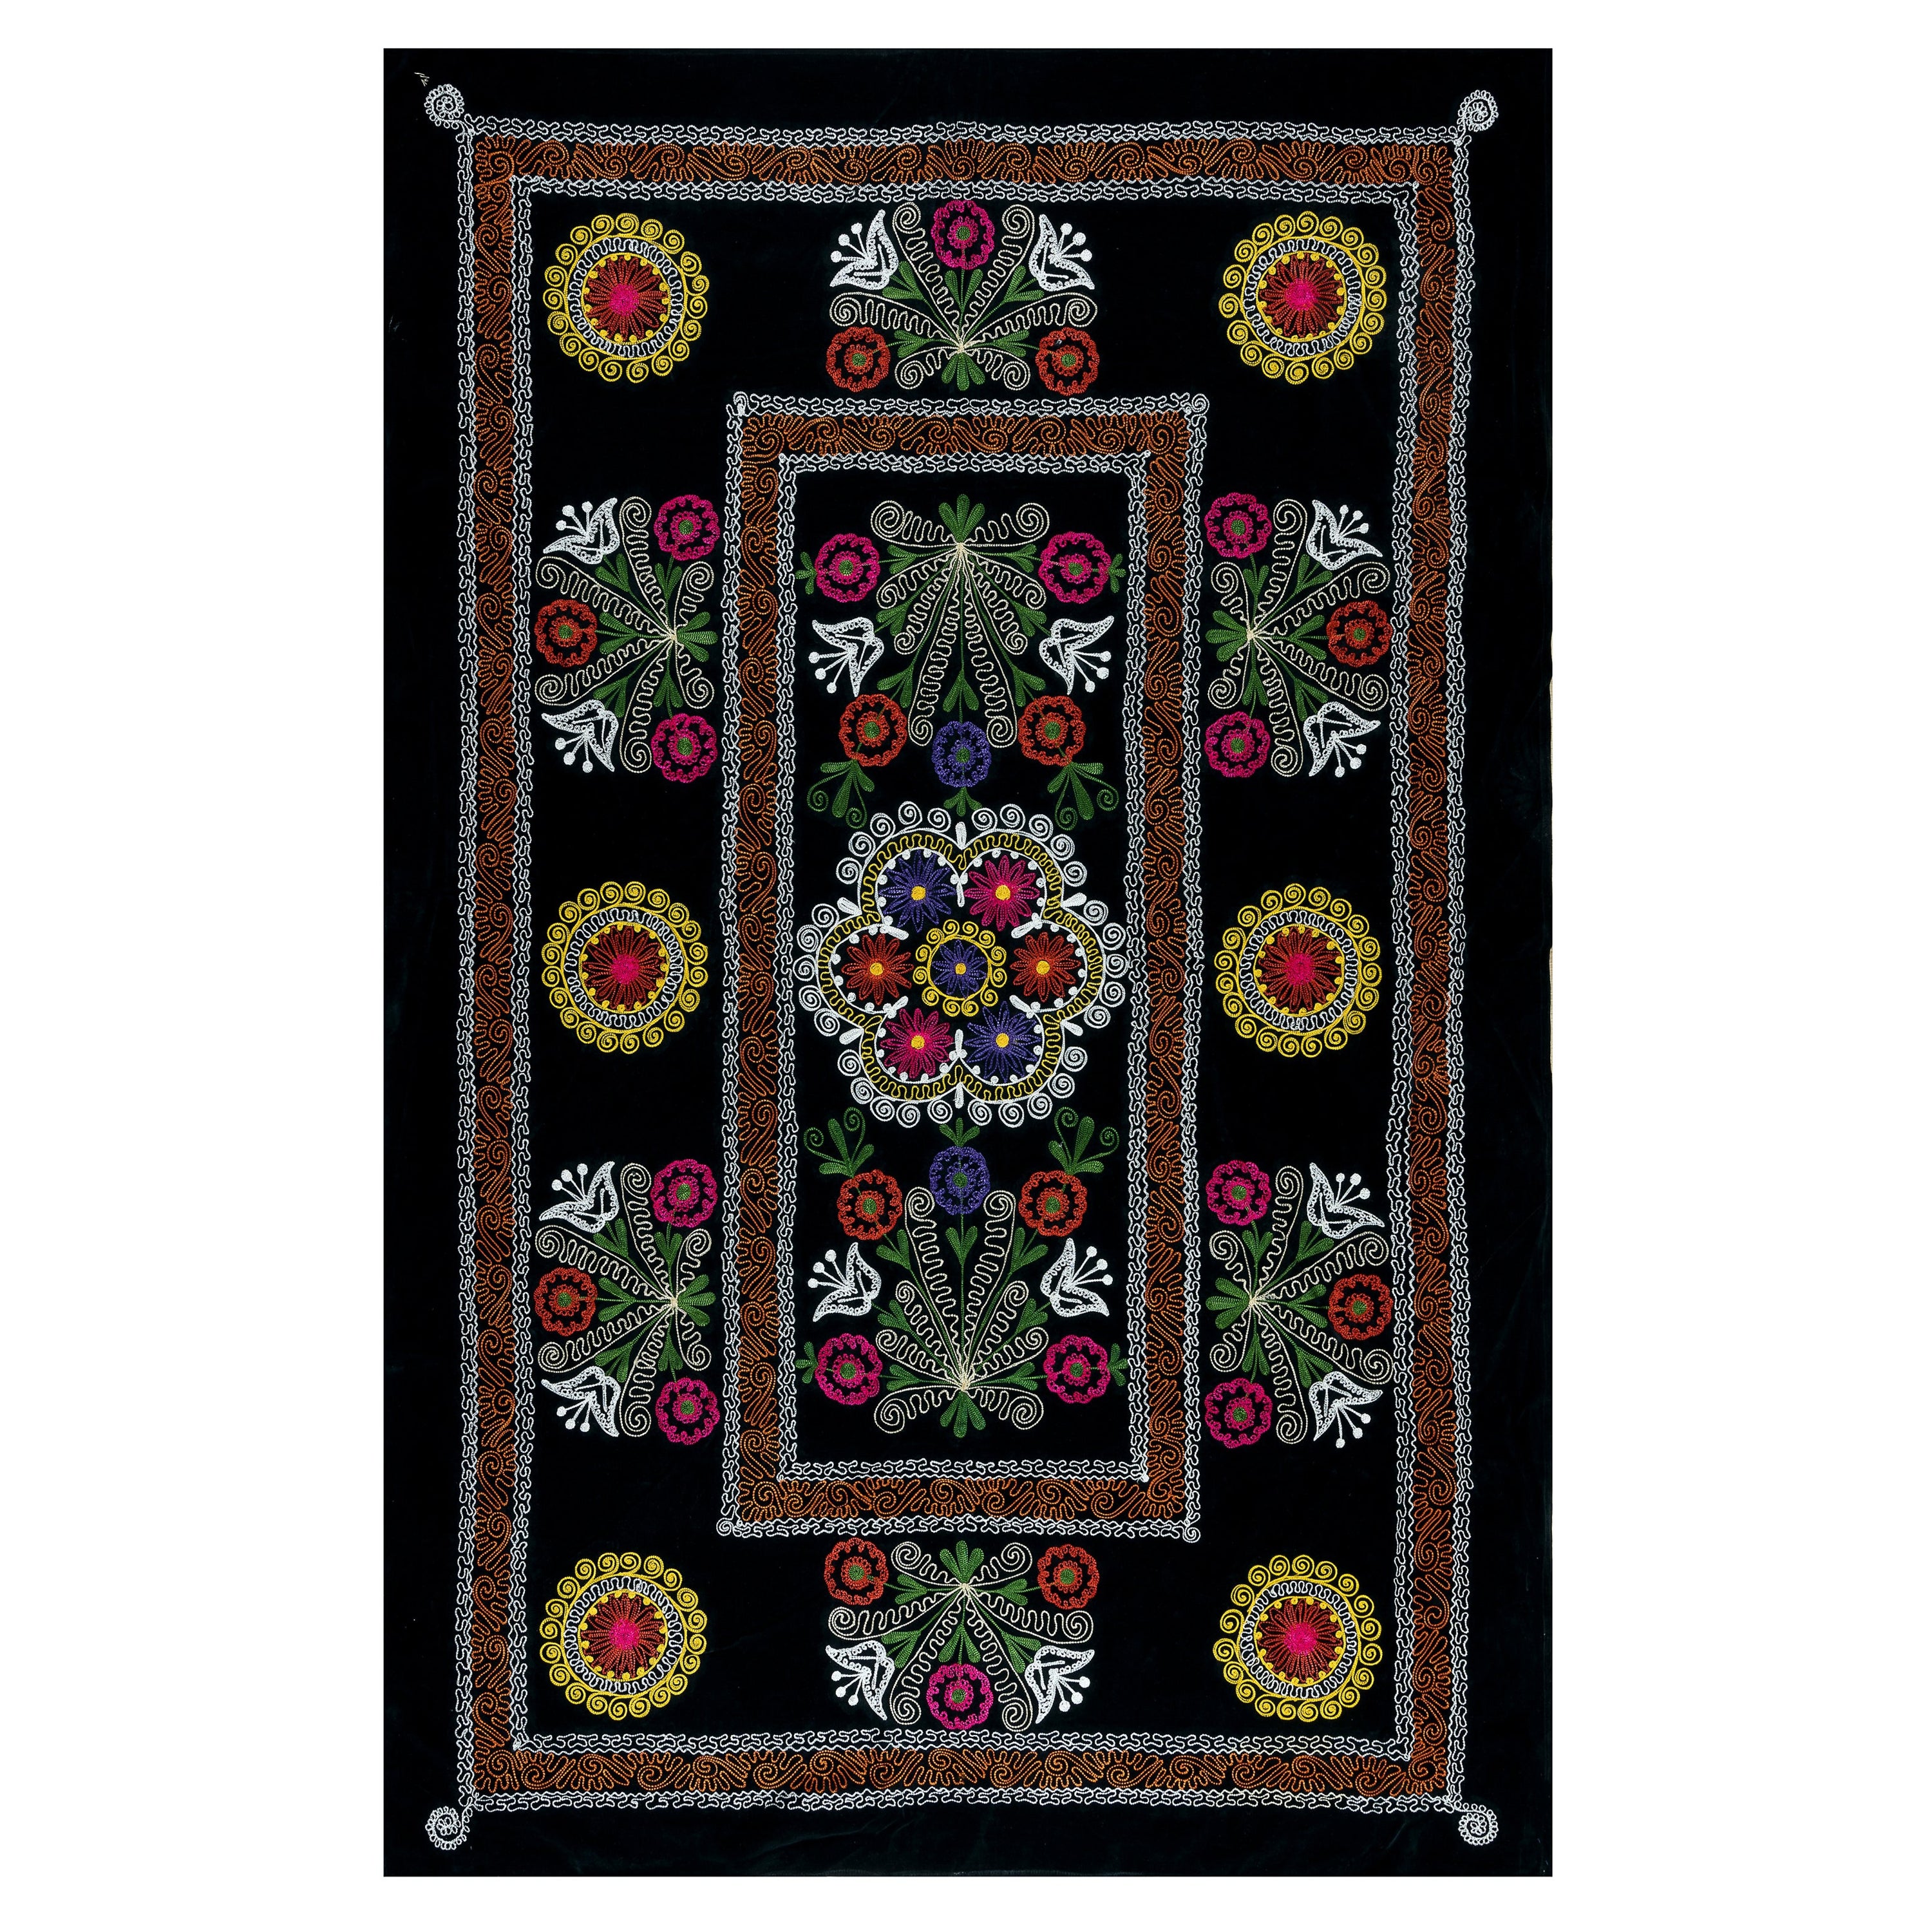 4.6x6.8 Ft Black Embroidered Tablecloth, Living Room Decor Silk Wall Hanging